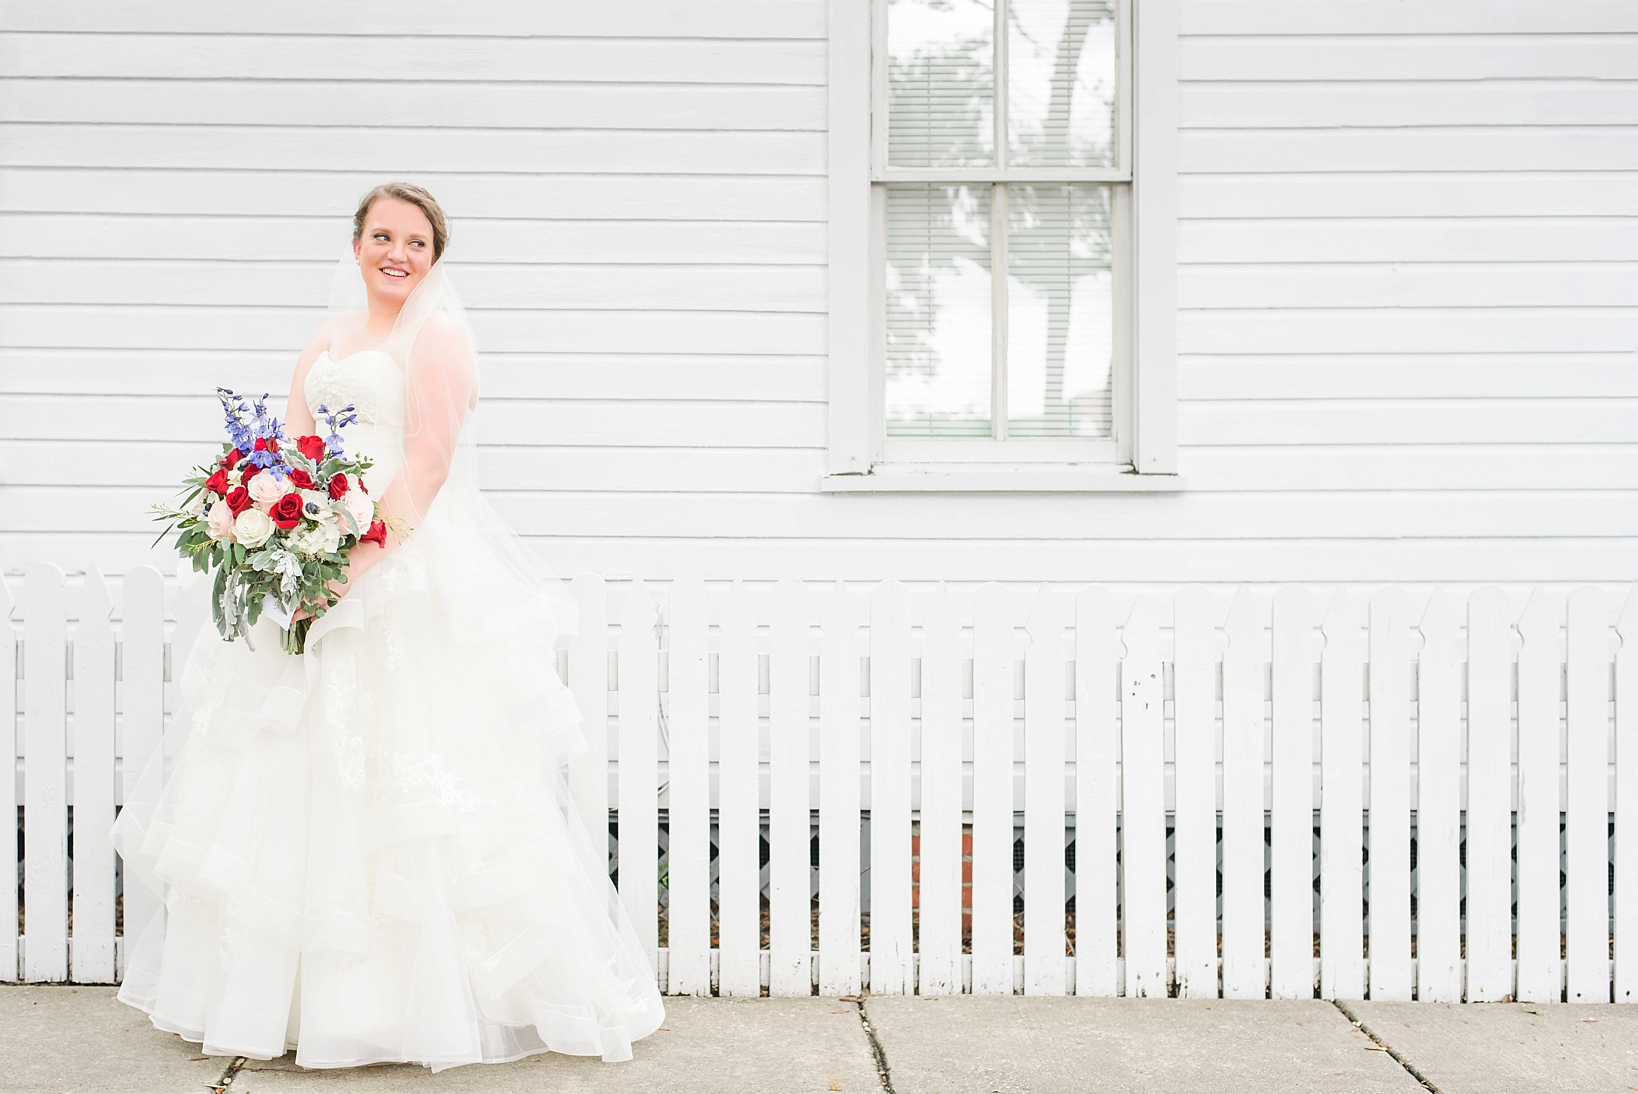 Asymmetrical portrait of a bride holding her red white and blue floral bouquet in front of a white picket fence